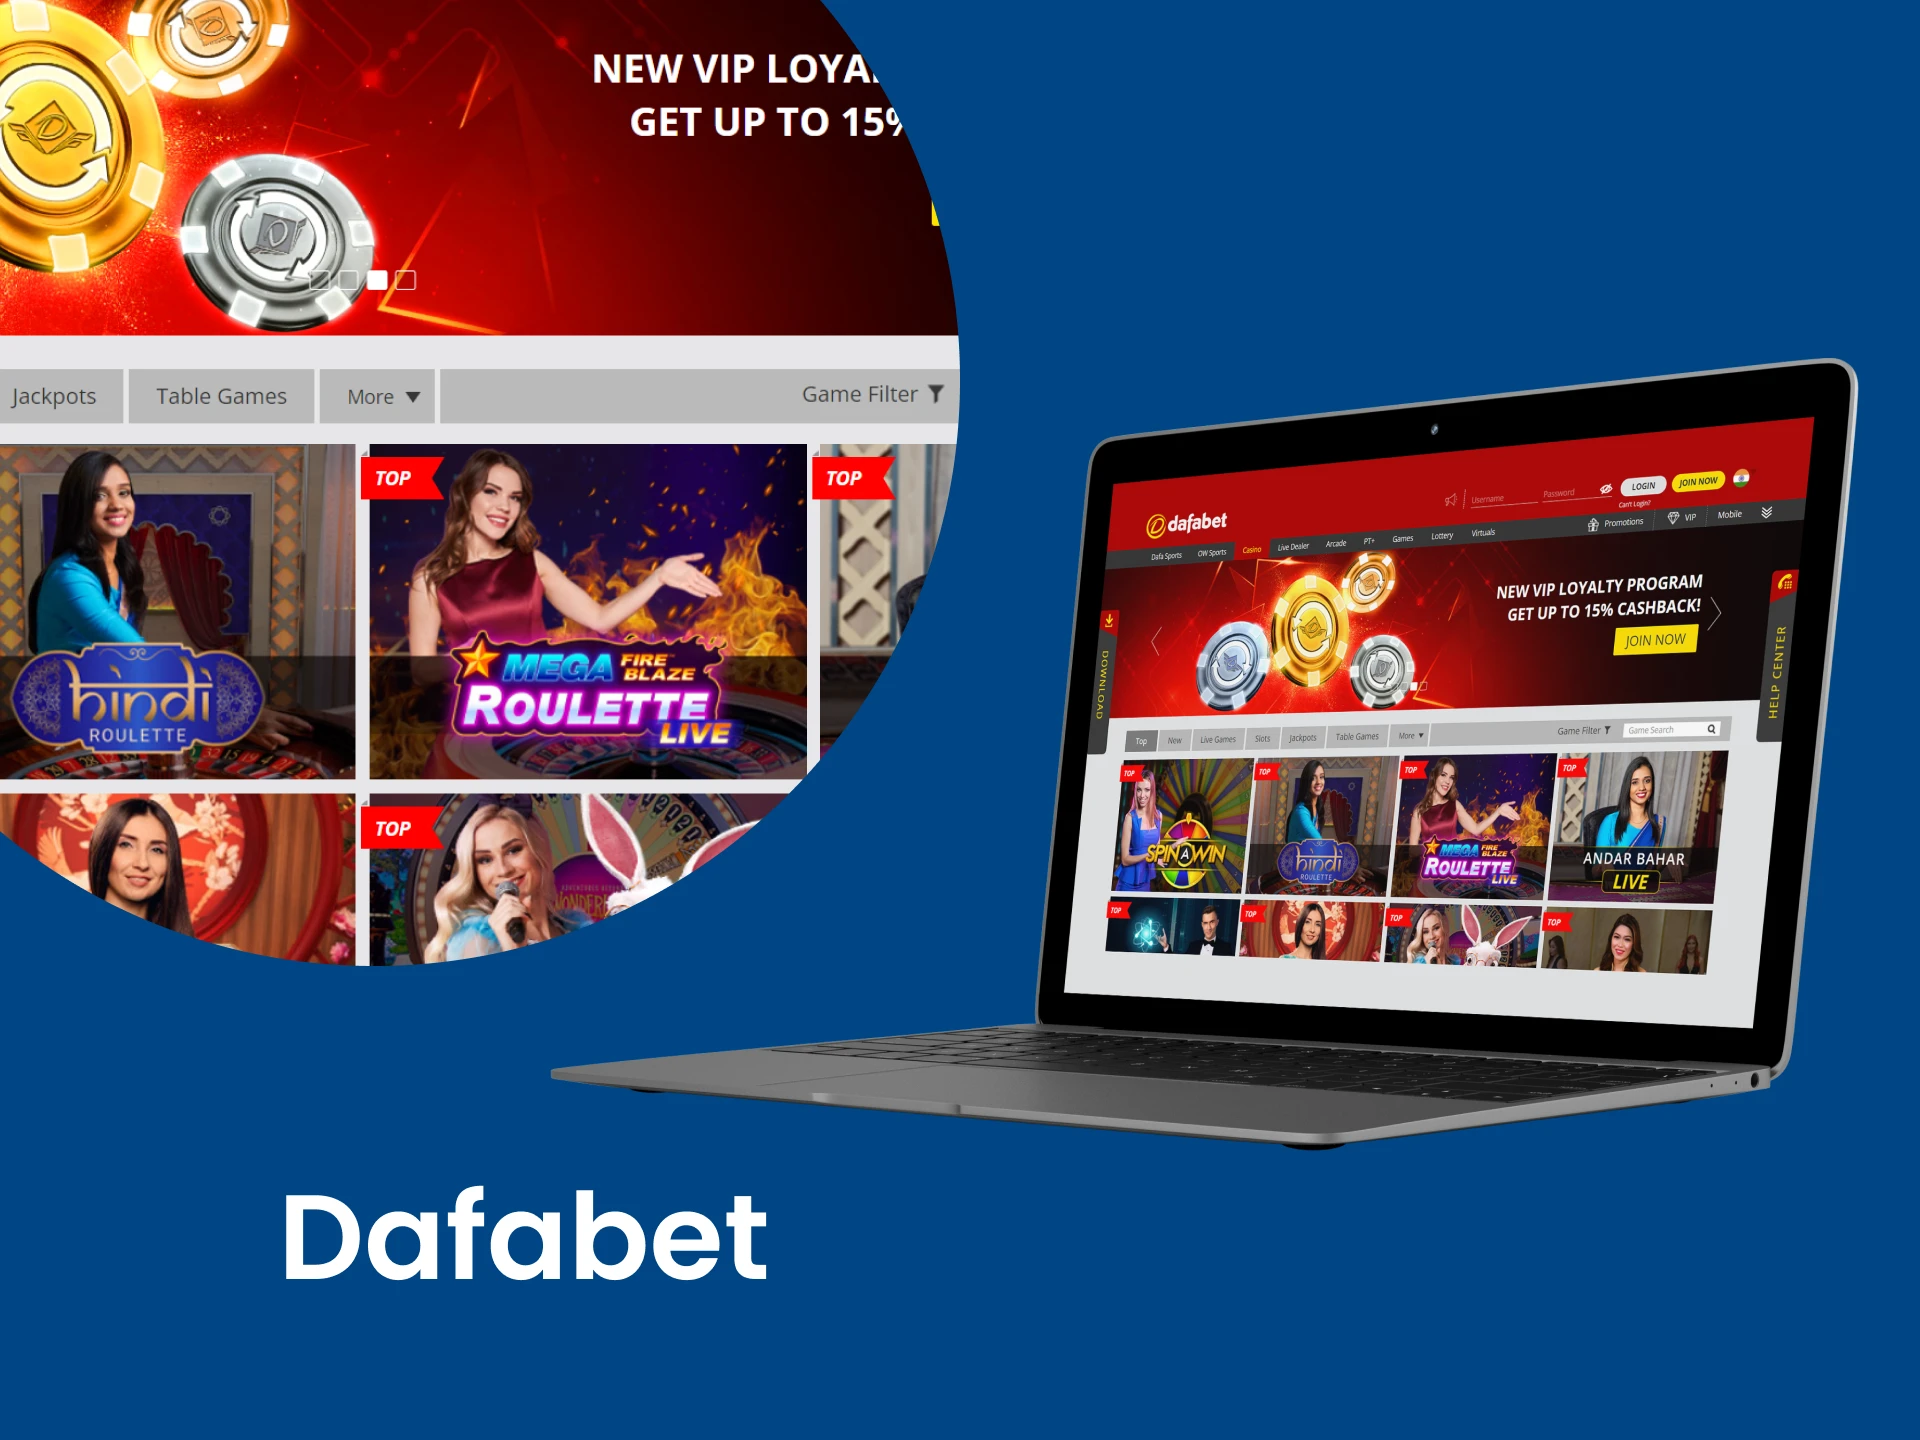 Dafabet is ideal for playing in online casinos.